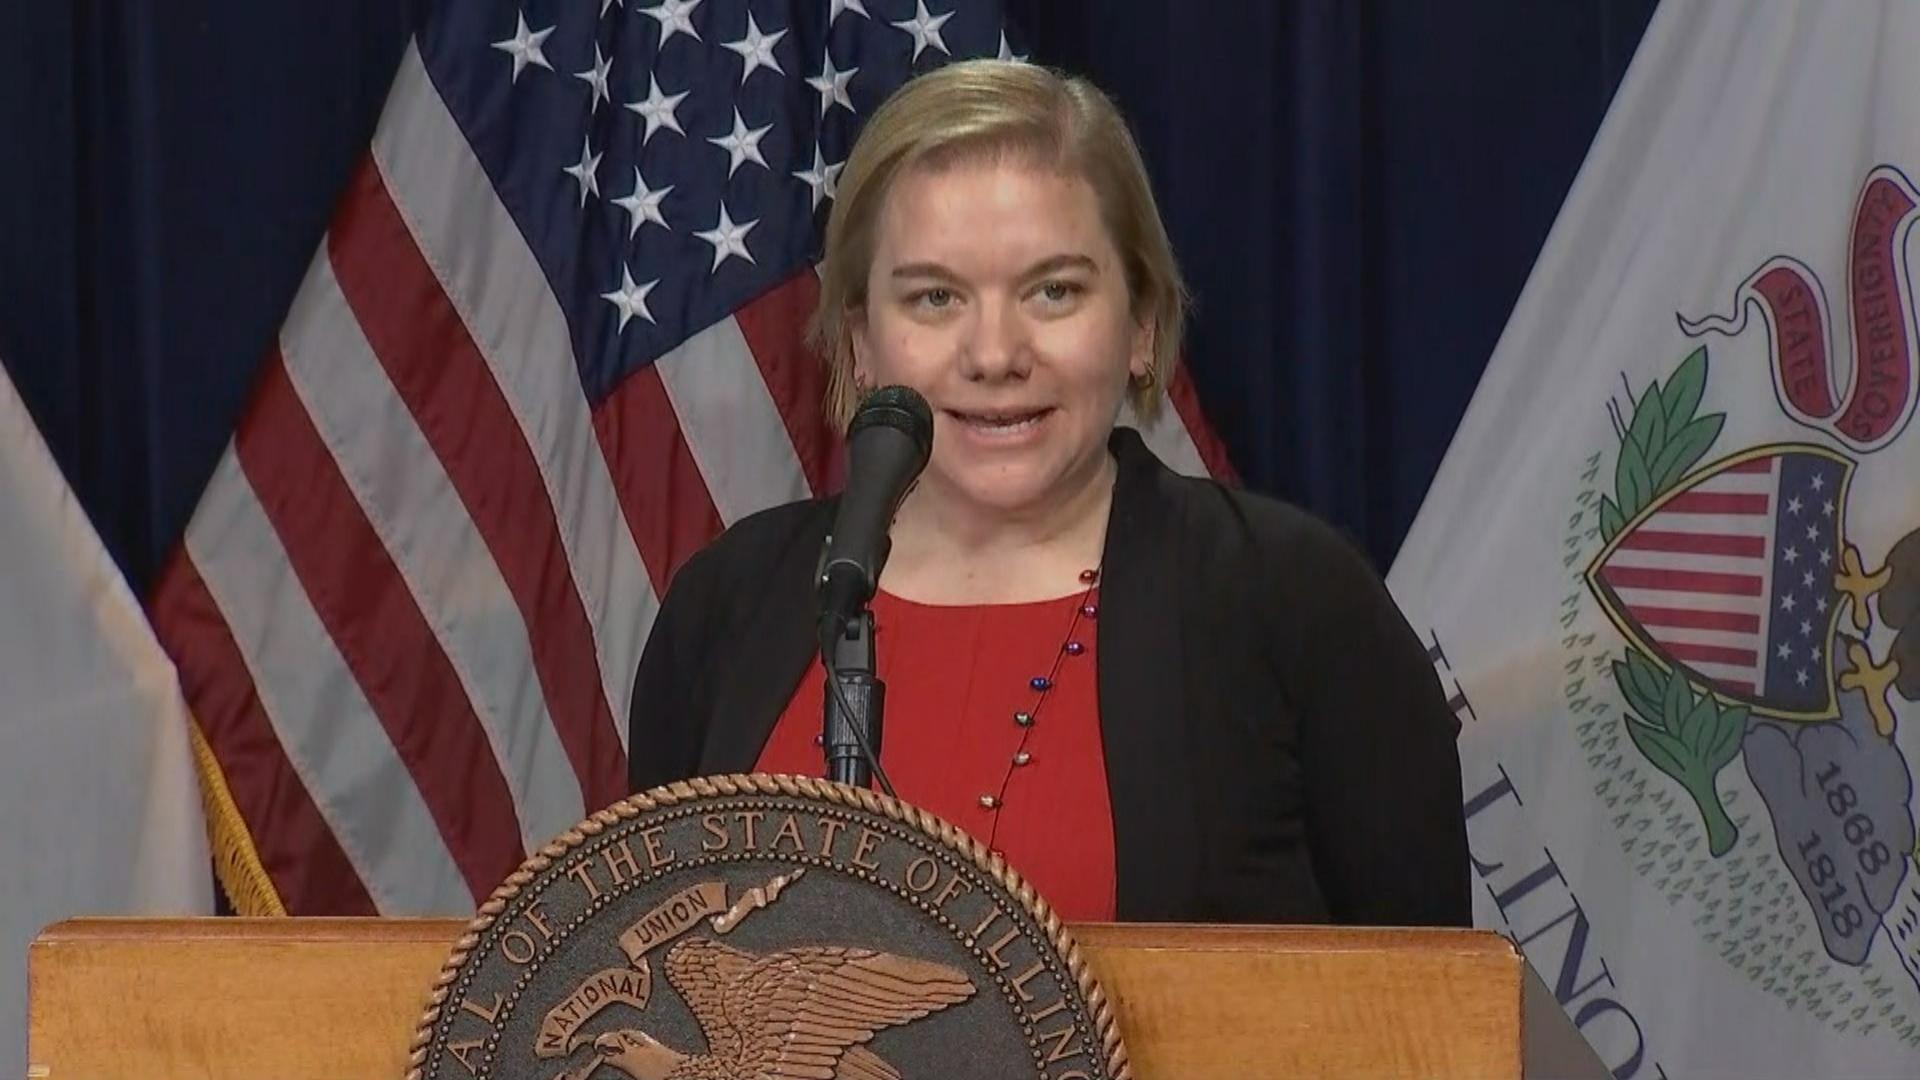 Chicago Department of Public Health Director Dr. Allison Arwady speaks Tuesday, Dec. 22, 2020 at a press briefing on the coronavirus with Illinois Department of Public Health Director Dr. Ngozi Ezike and U.S. Surgeon General Jerome Adams. (WTTW News)